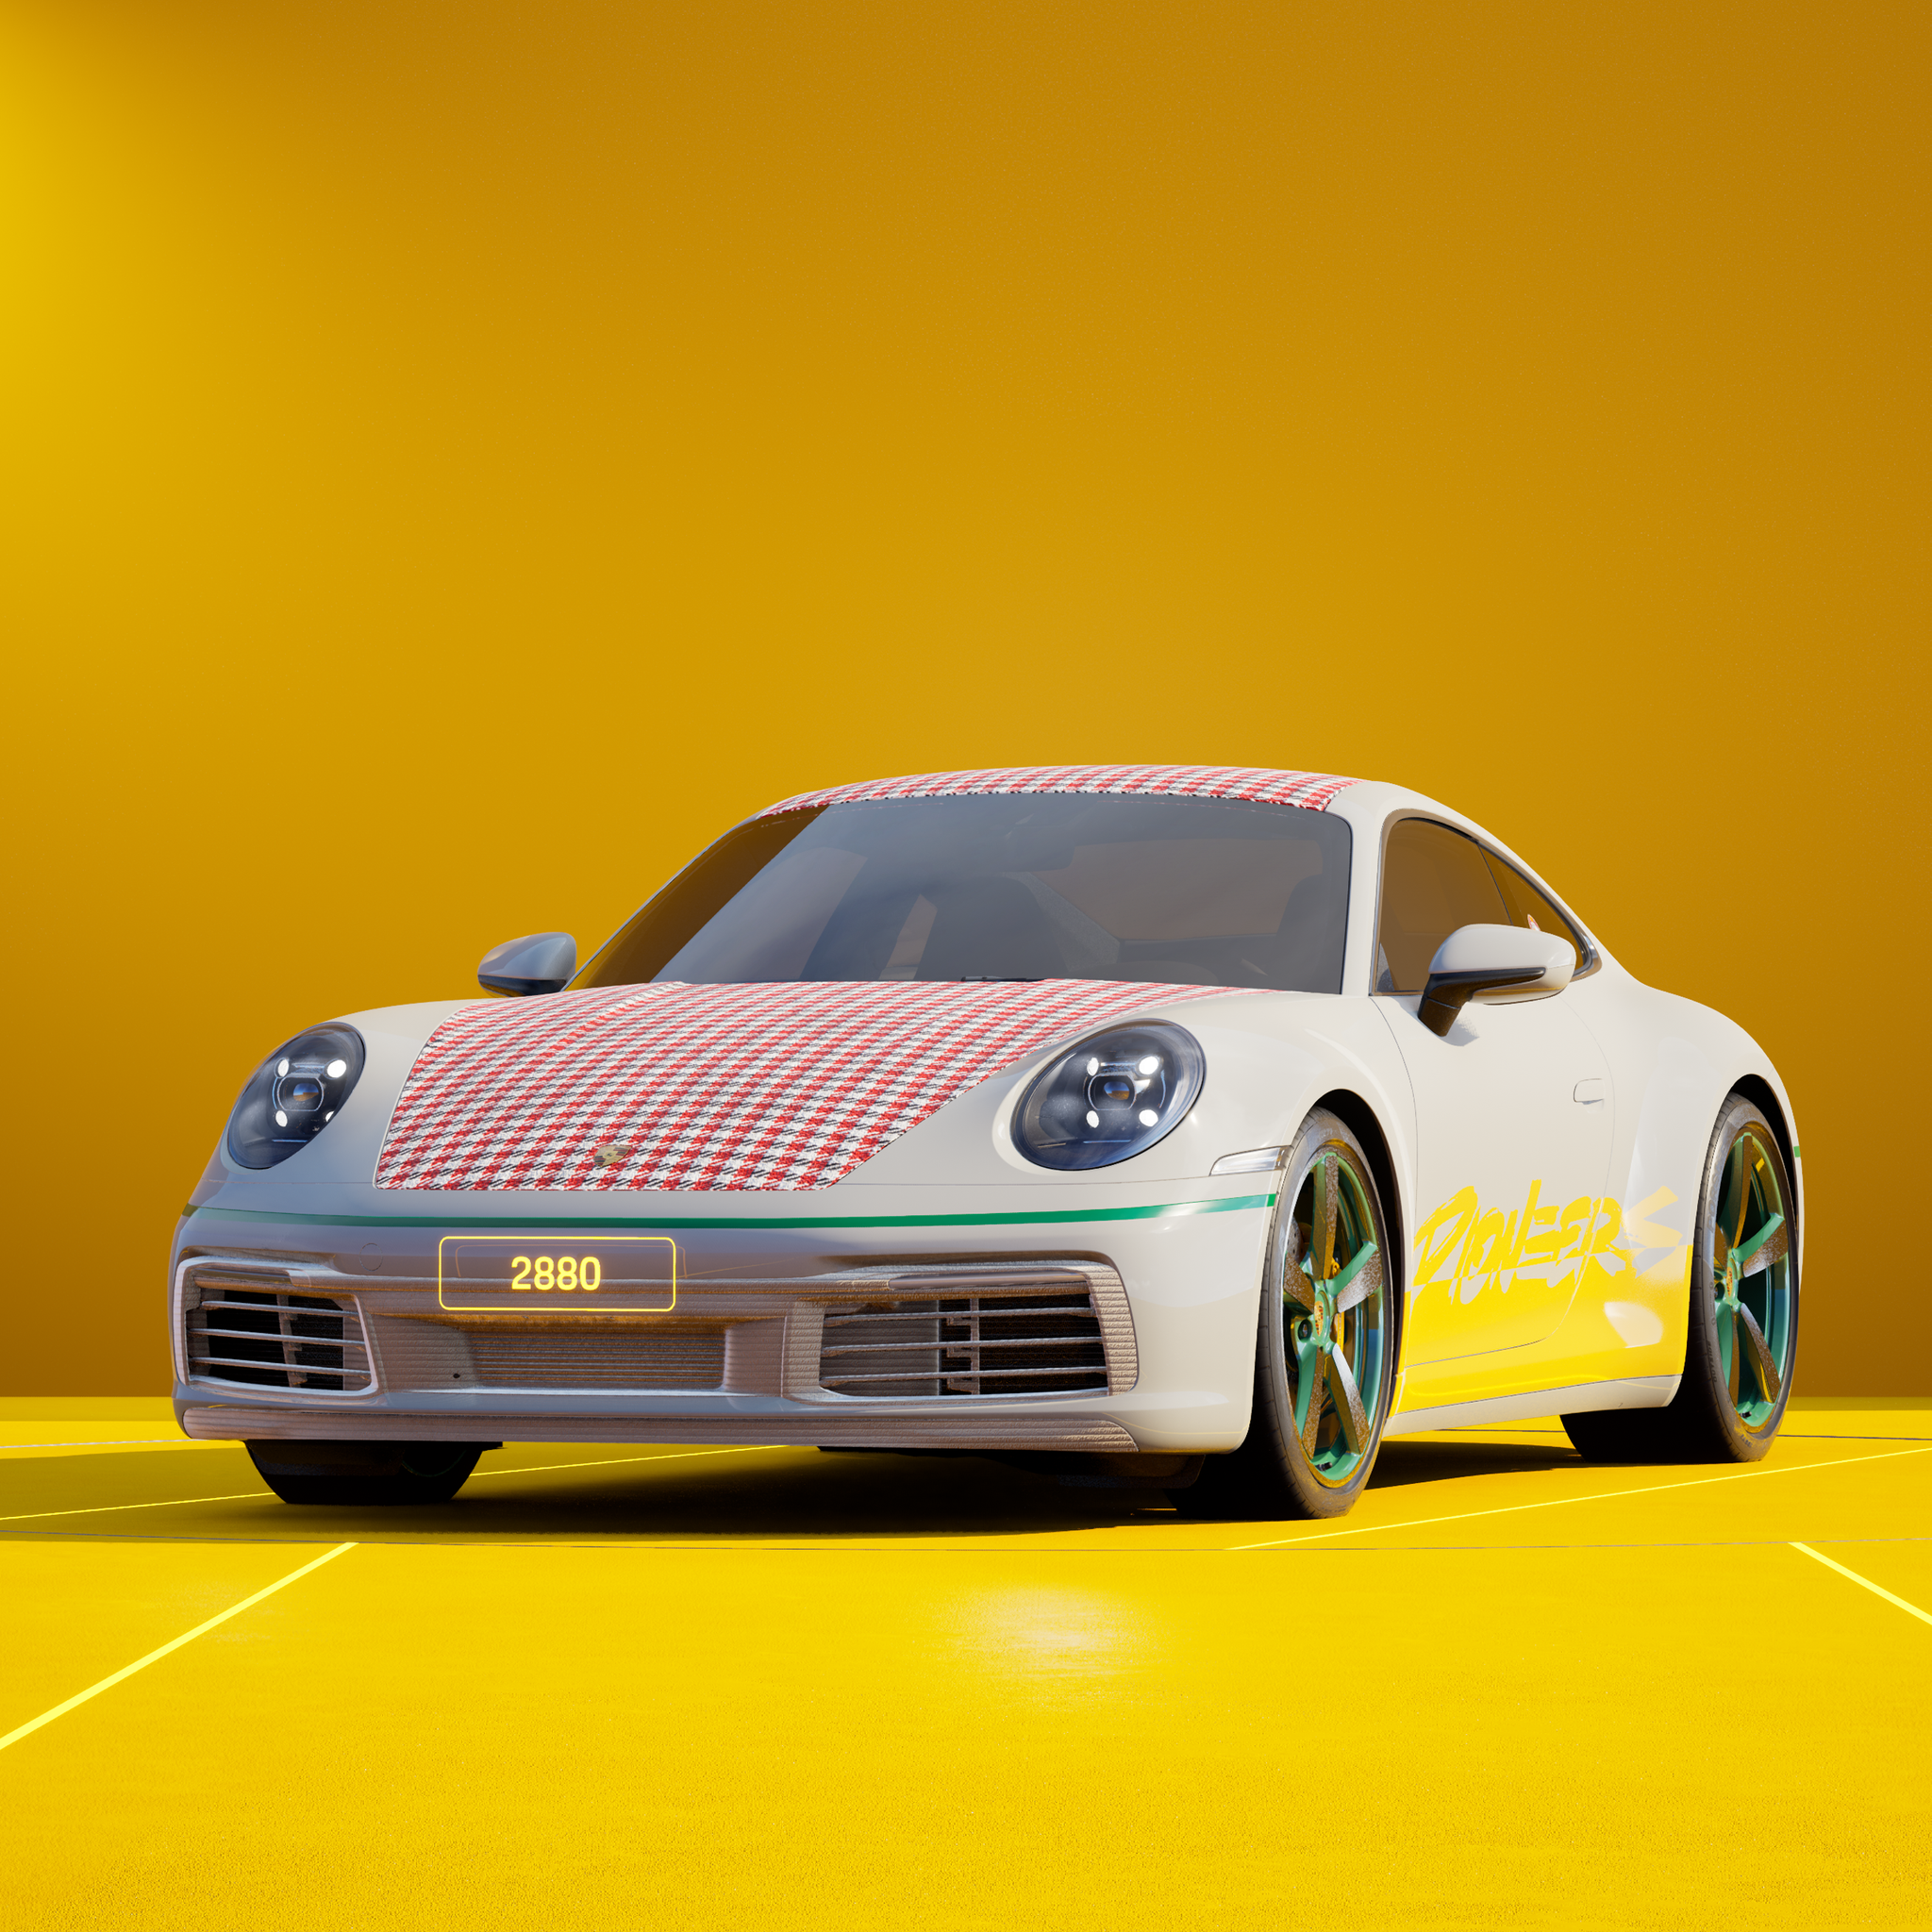 The PORSCHΞ 911 2880 image in phase